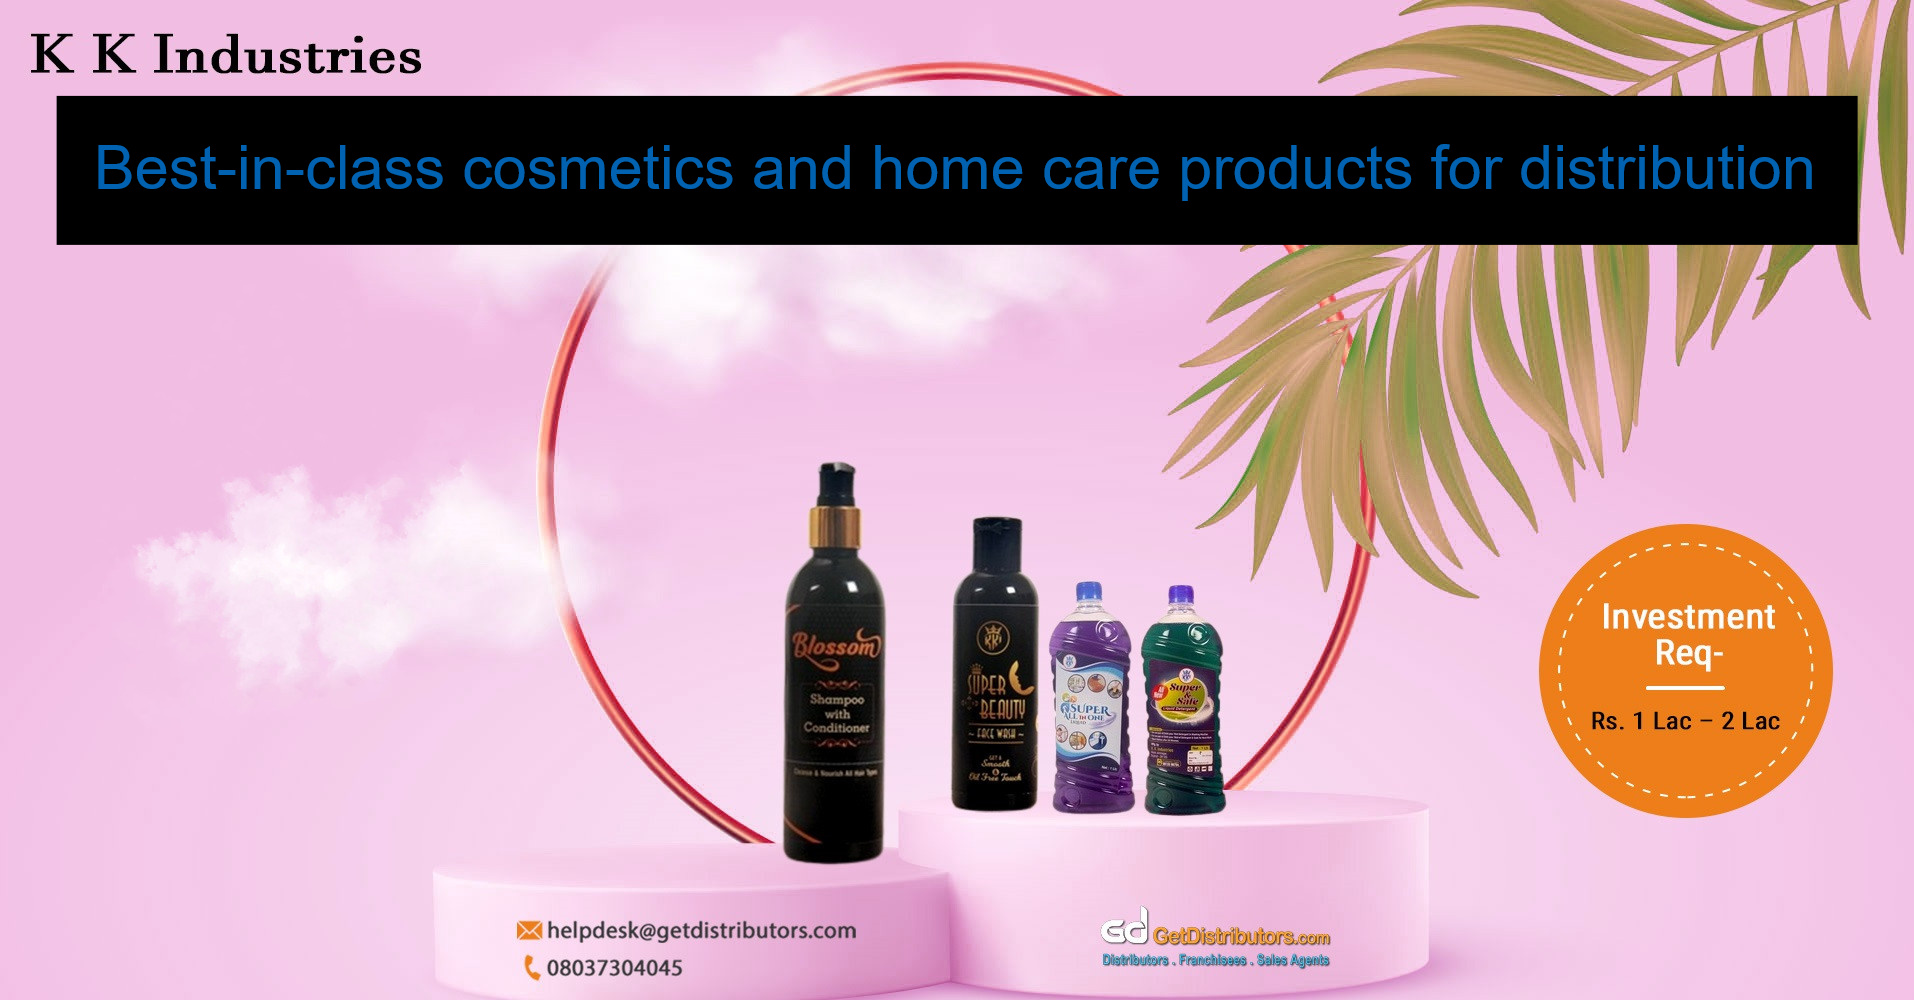 Best-in-class cosmetics and home care products for distribution